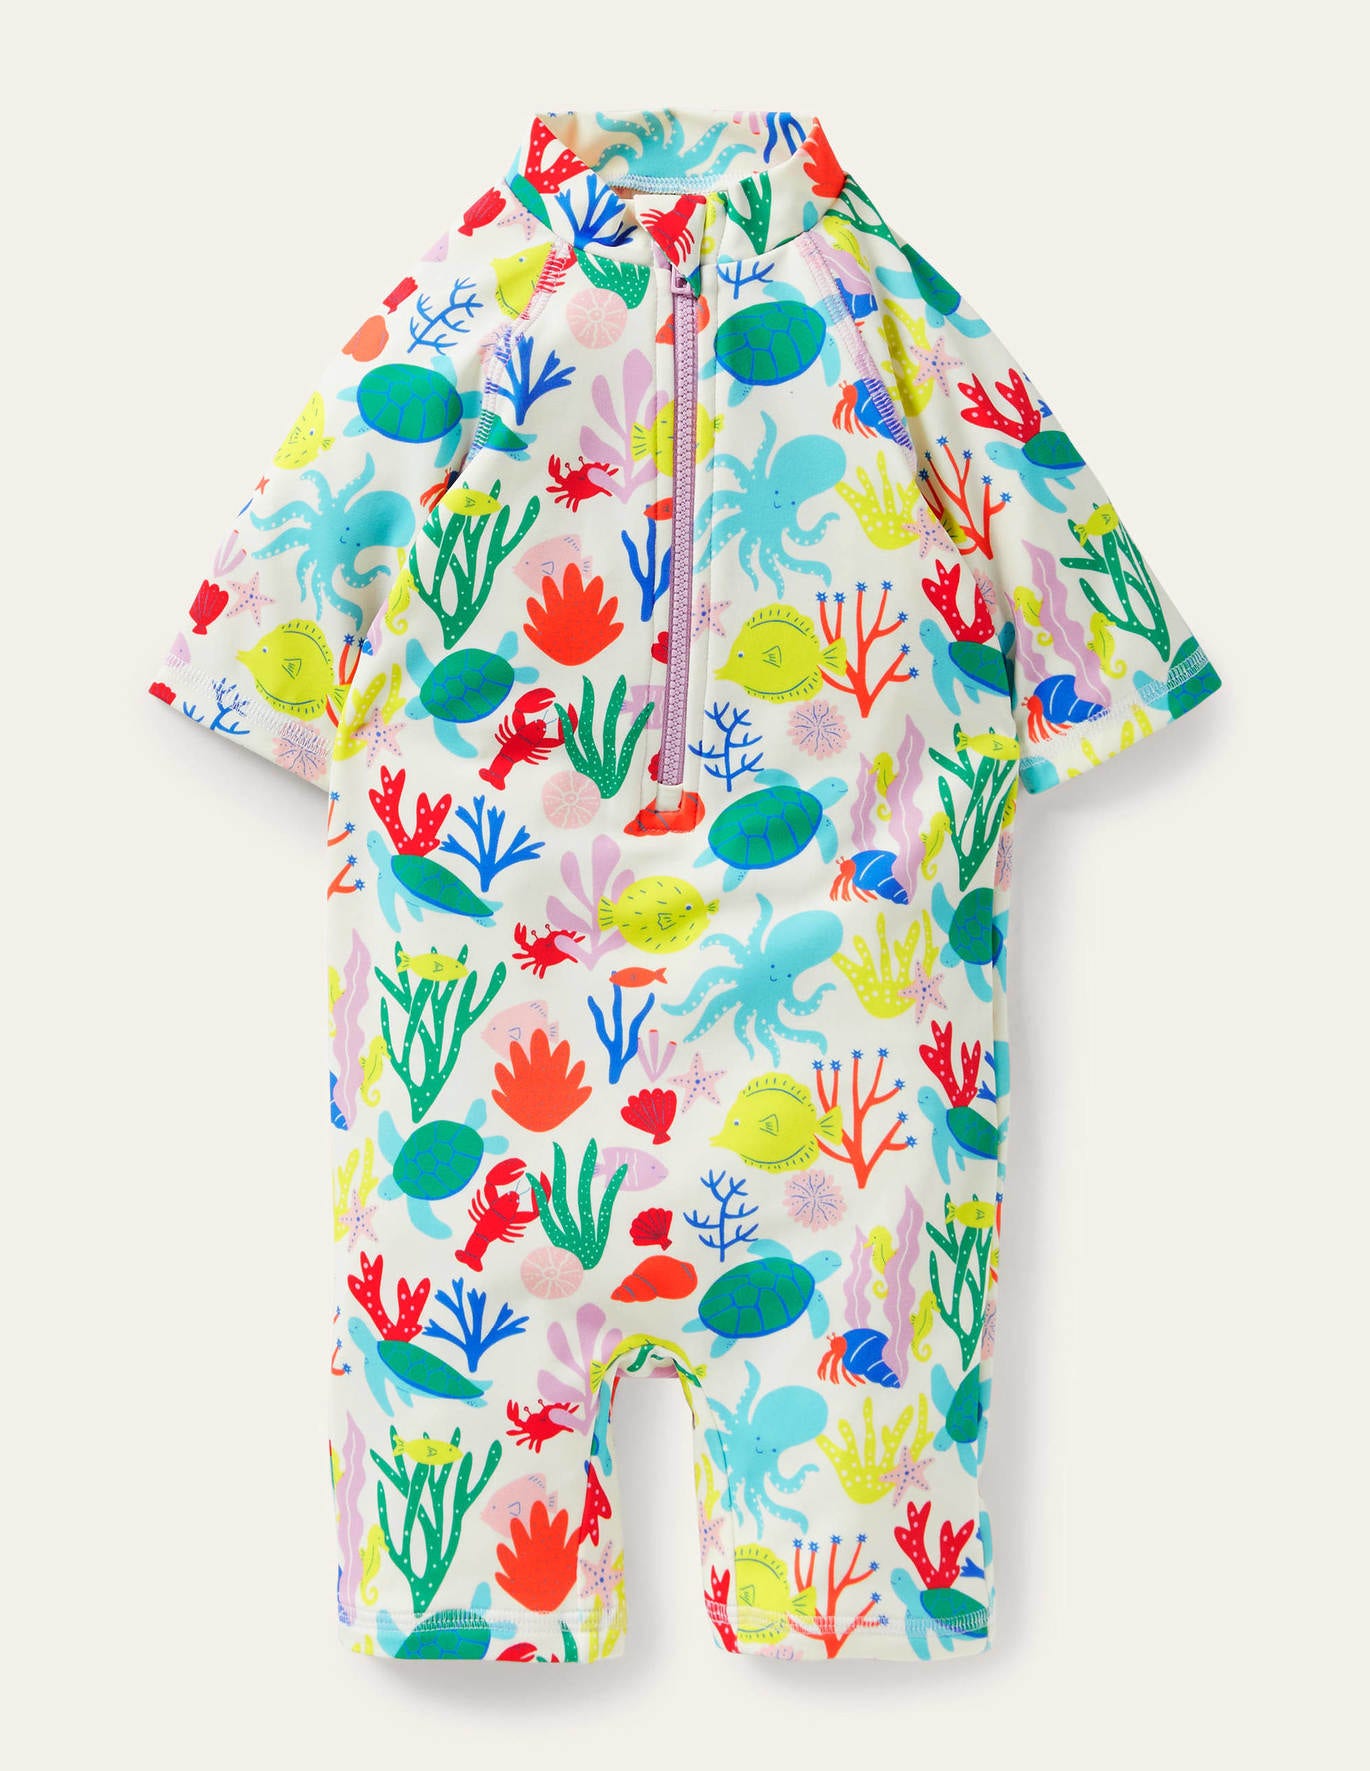 Boden Fun Surf Suit - Ivory Coral Reef